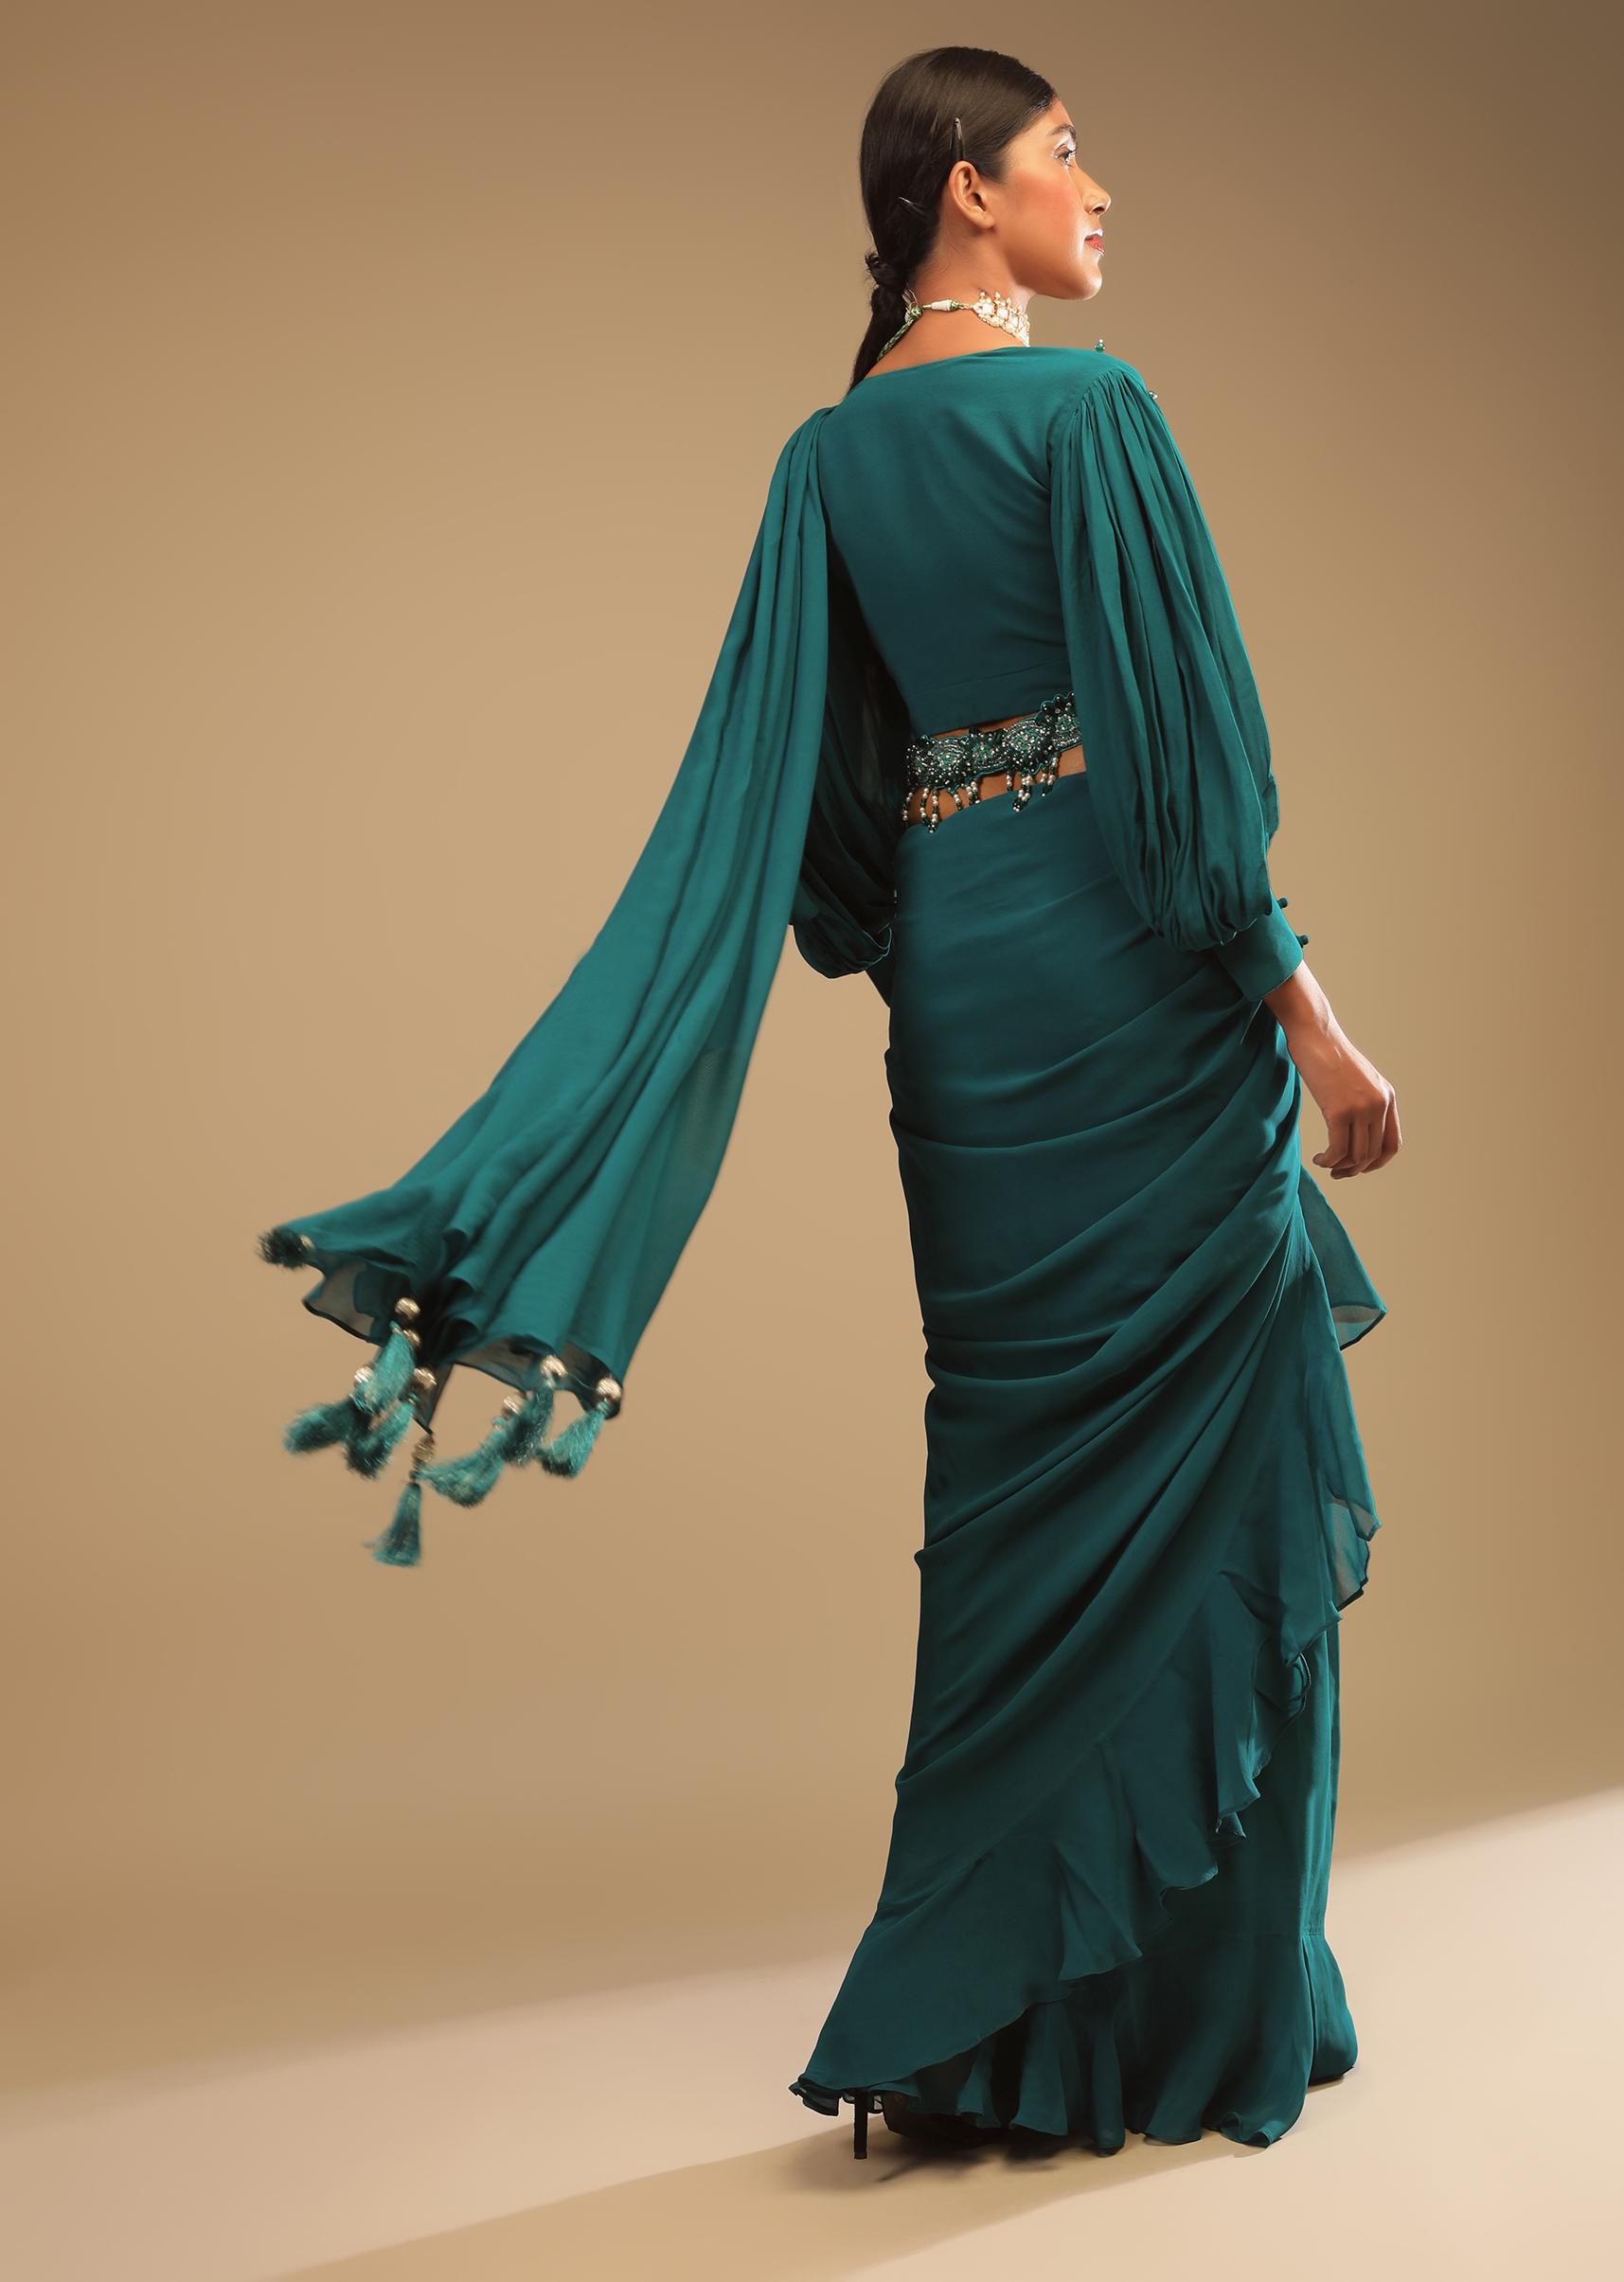 Kalki Fashion,M001AT384Y-SG67110,Teal Blue Saree In Georgette With Ruffle Frill And A Chunky Embroidered Belt